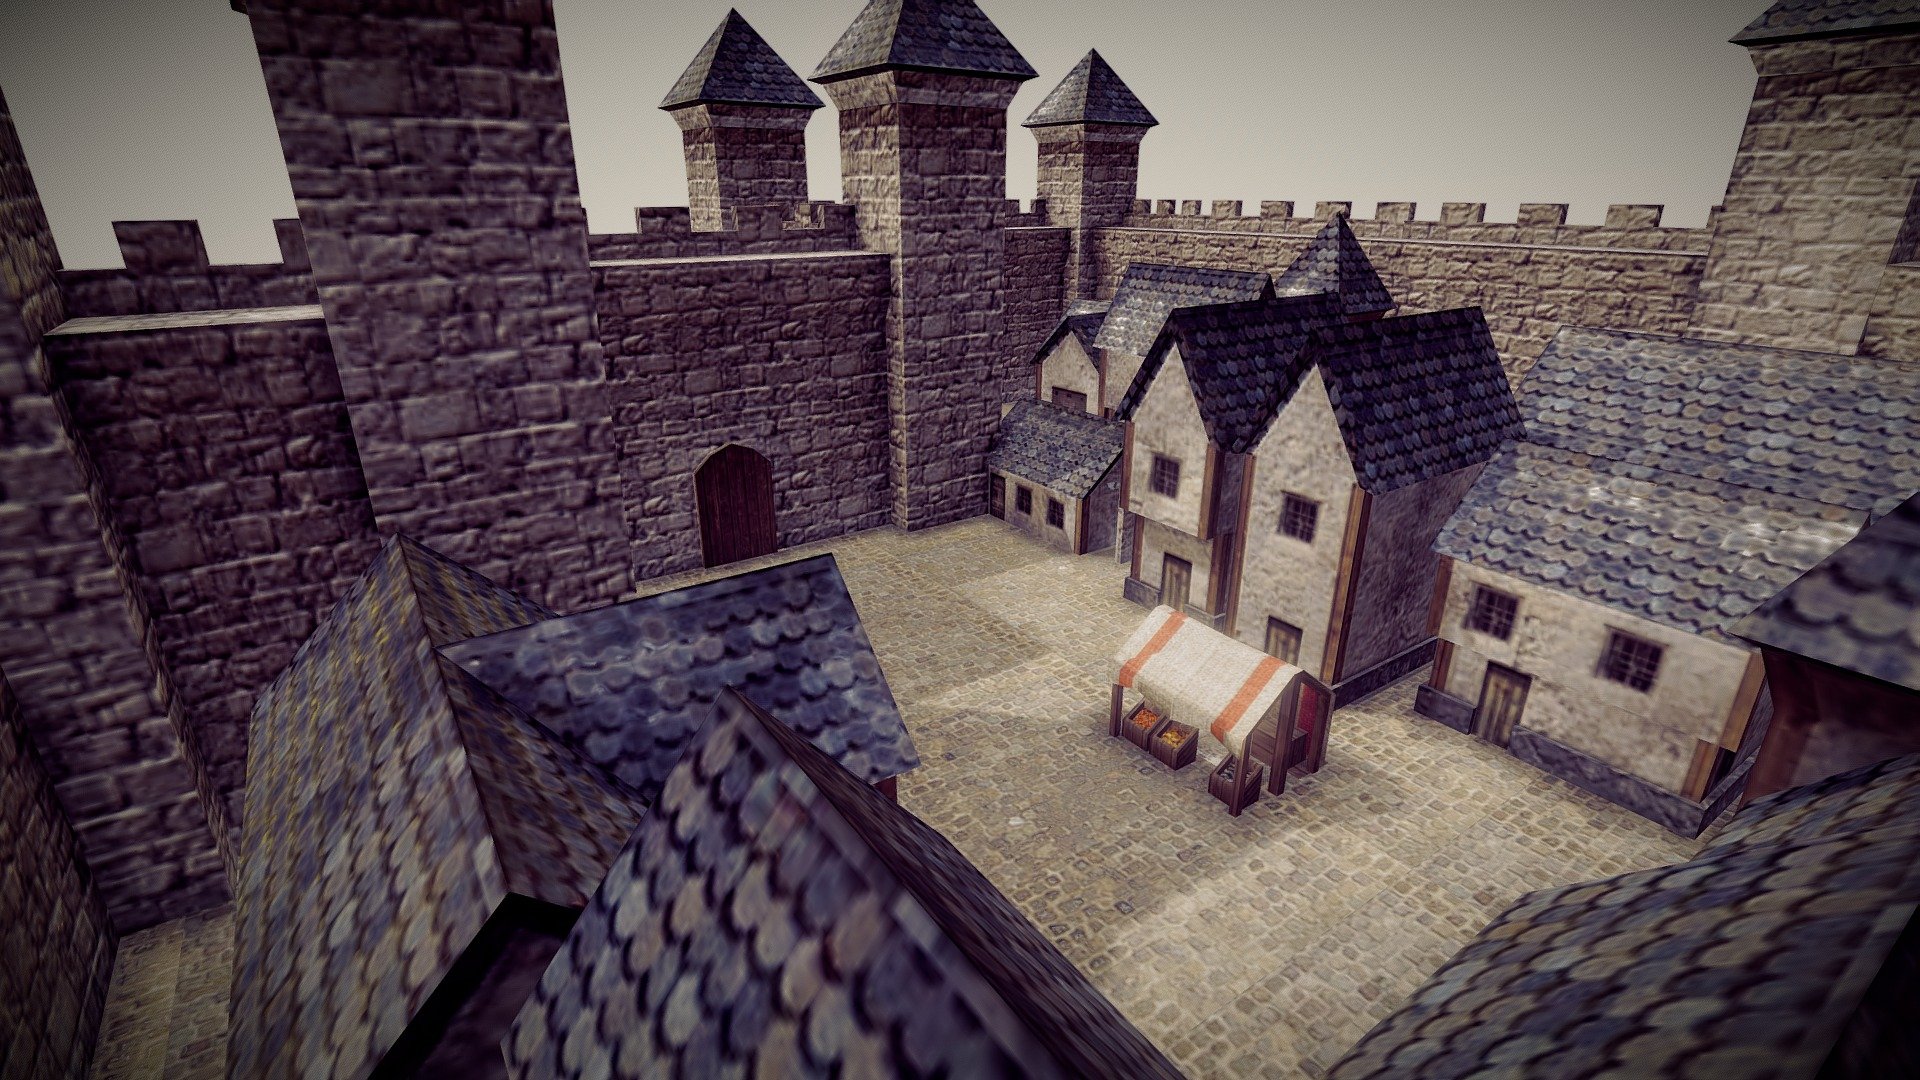 This work was highly motivated by https://skfb.ly/6GVEx - Medieval Town - Download Free 3D model by fangzhangmnm 3d model